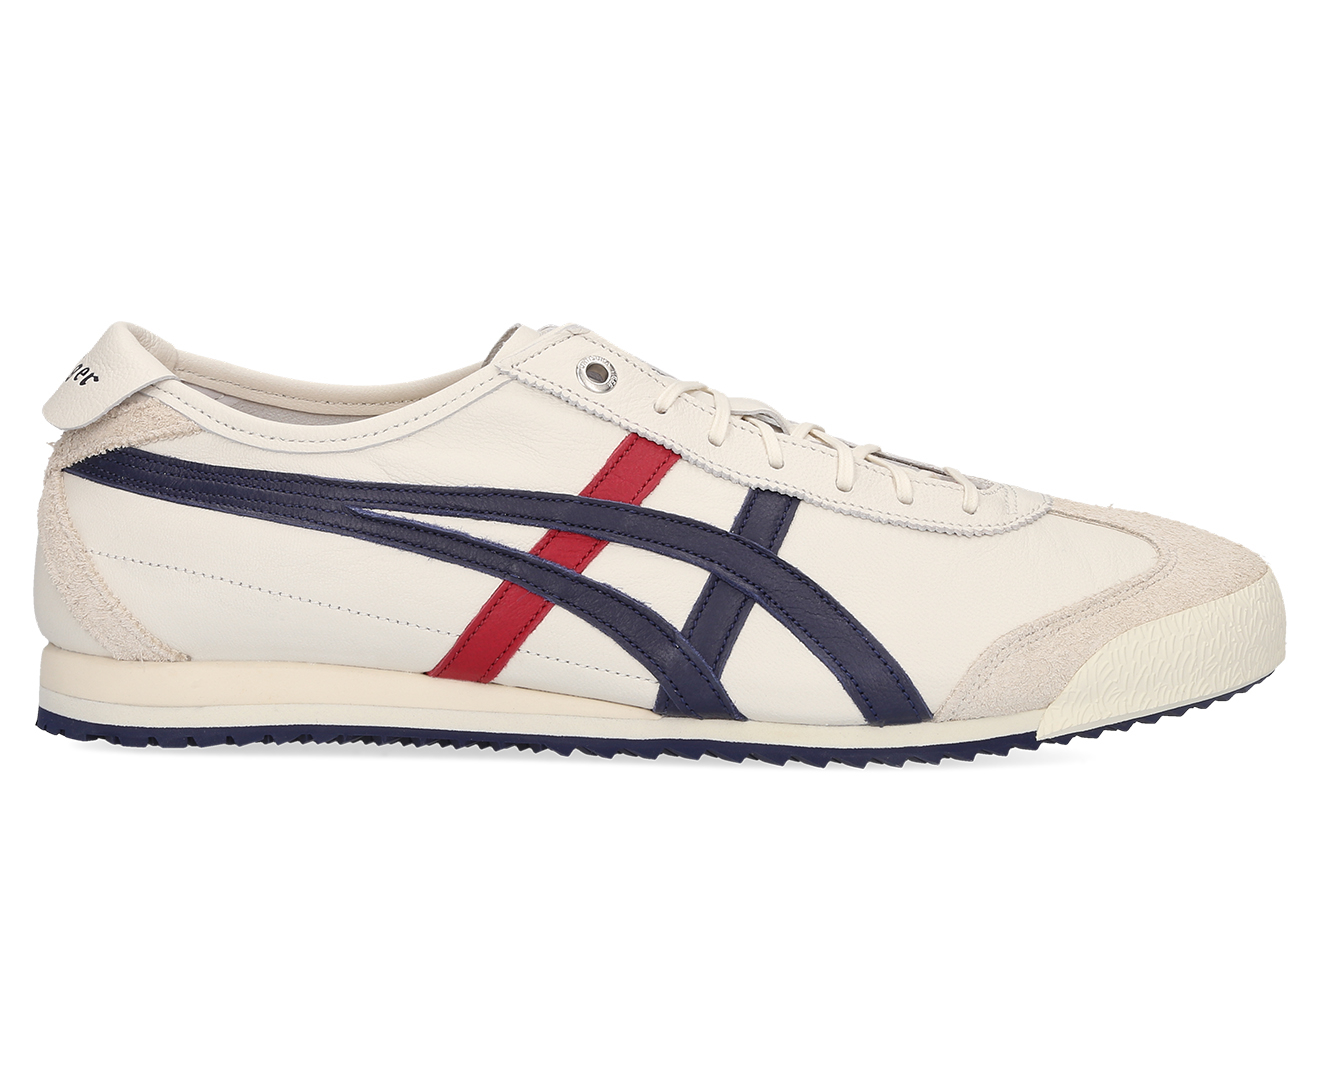 Onitsuka Tiger Unisex Mexico 66 SD Shoe - Cream/Peacoat | Catch.co.nz